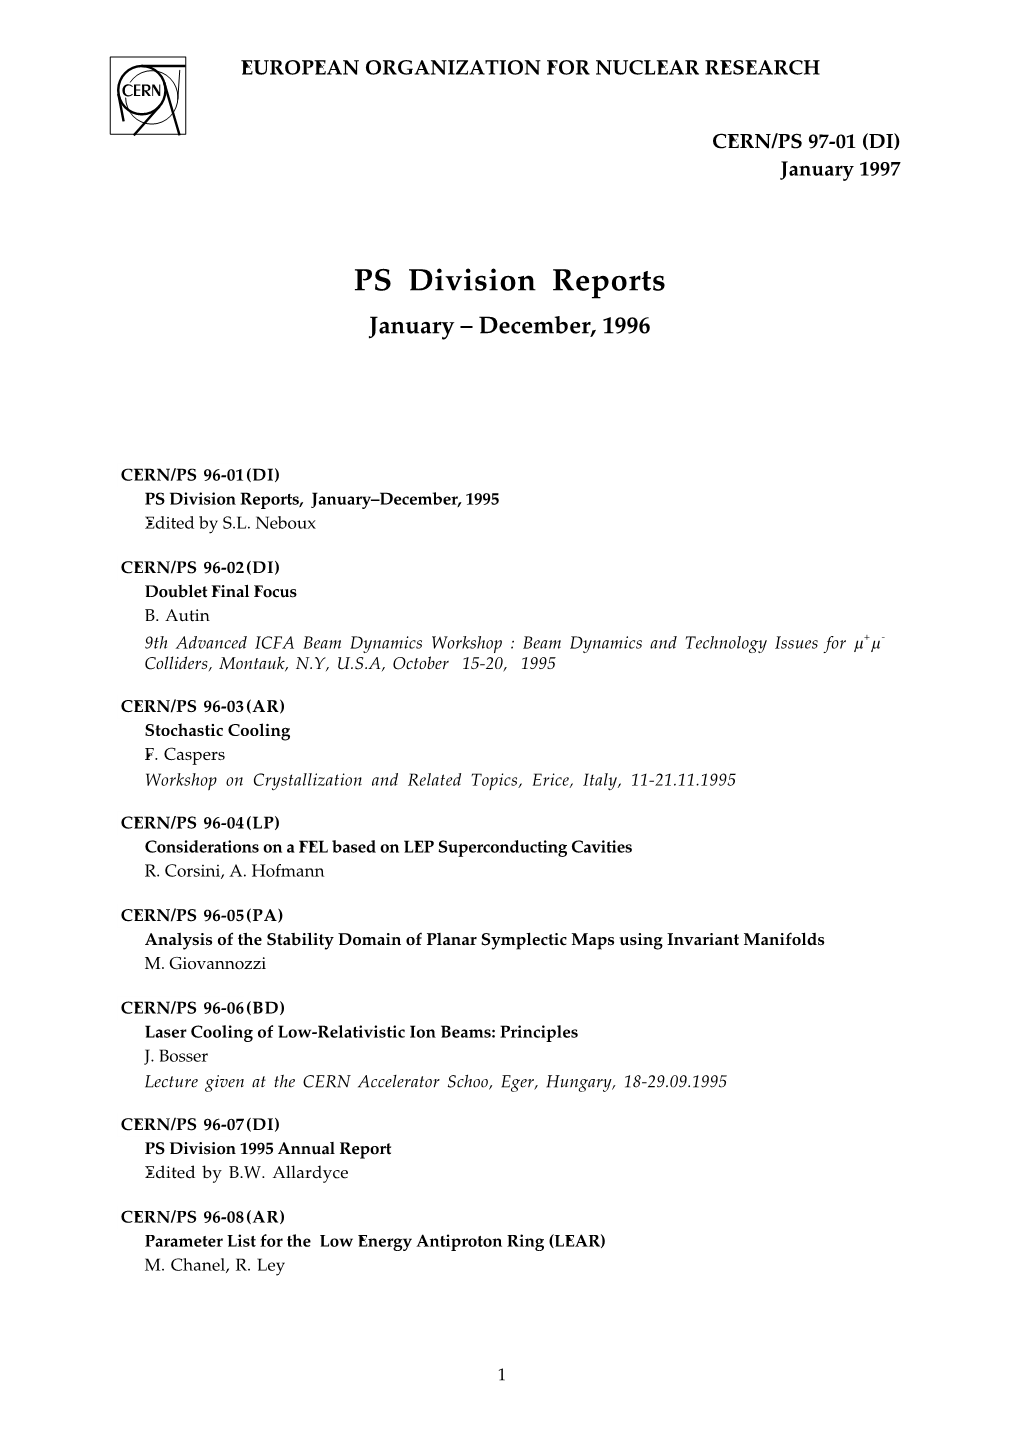 PS Division Reports January – December, 1996